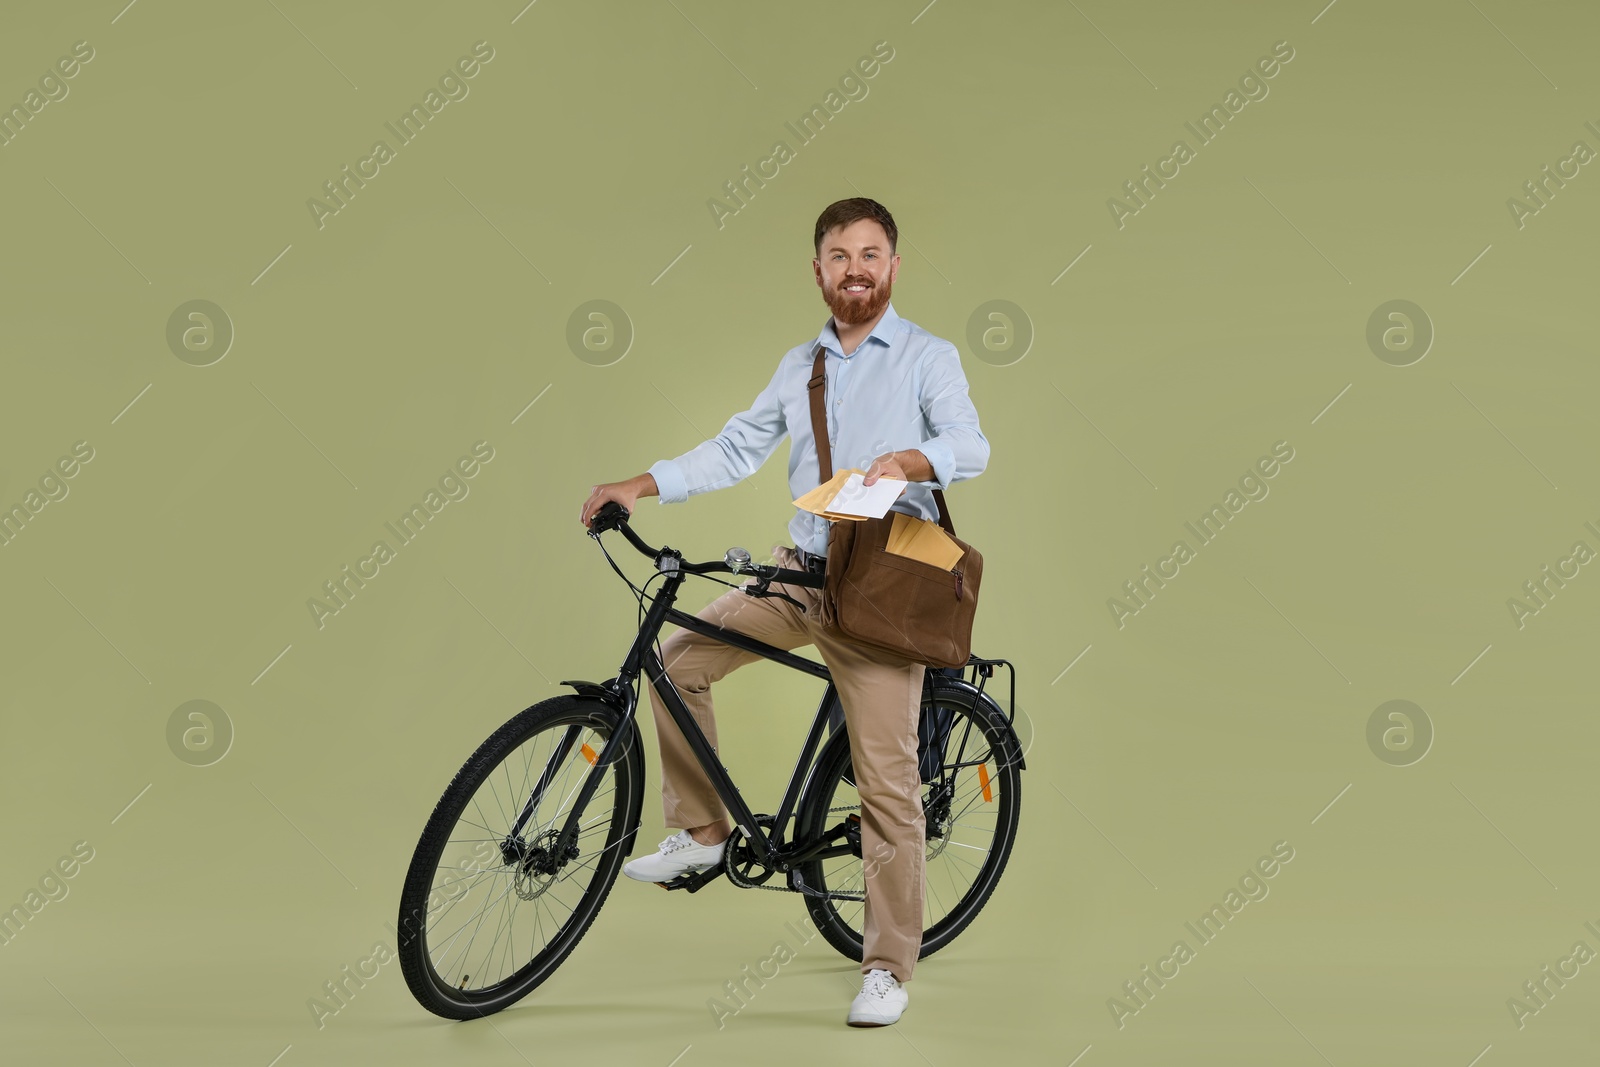 Photo of Postman on bicycle delivering letters against light green background